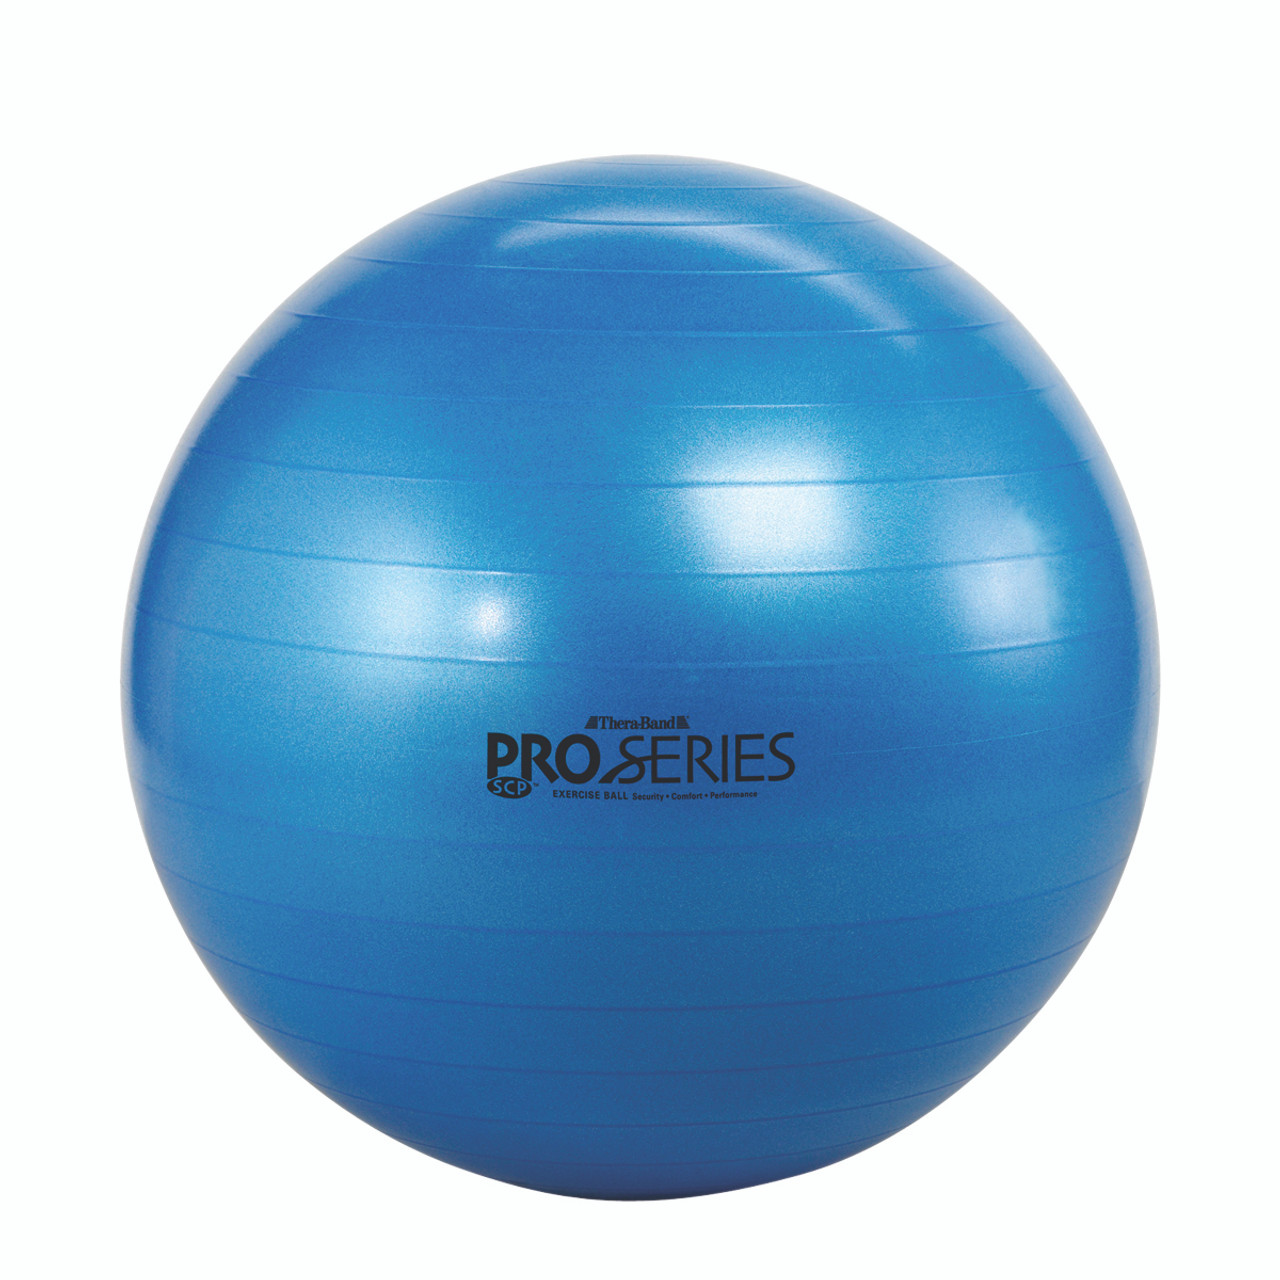 TheraBand¨ Inflatable Exercise Ball - Pro Series SCPª - Blue - 30" (75 cm)